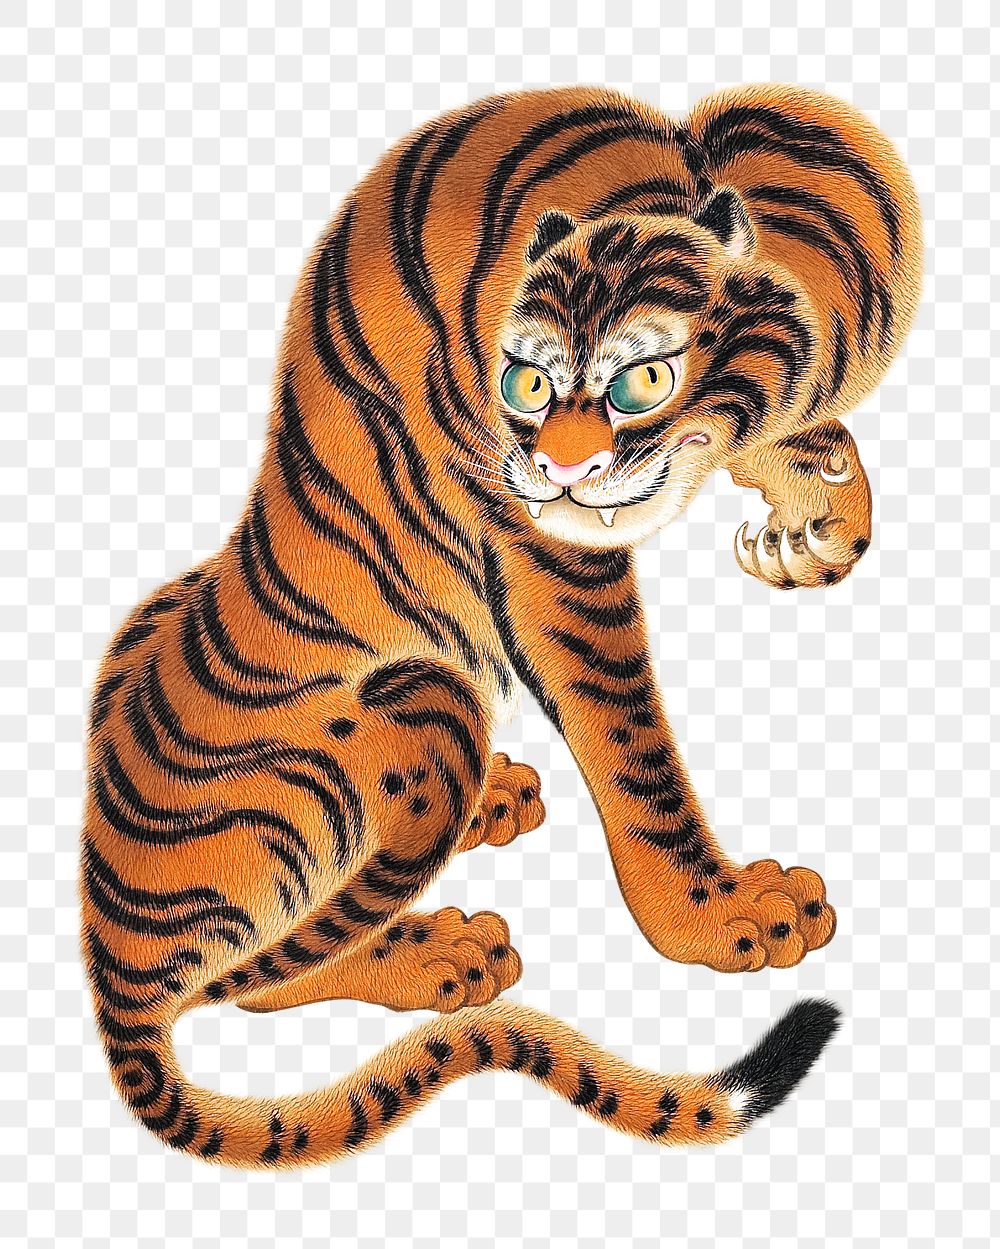 Png Tiger Cleaning Its Paw, transparent background. Remastered by rawpixel. 